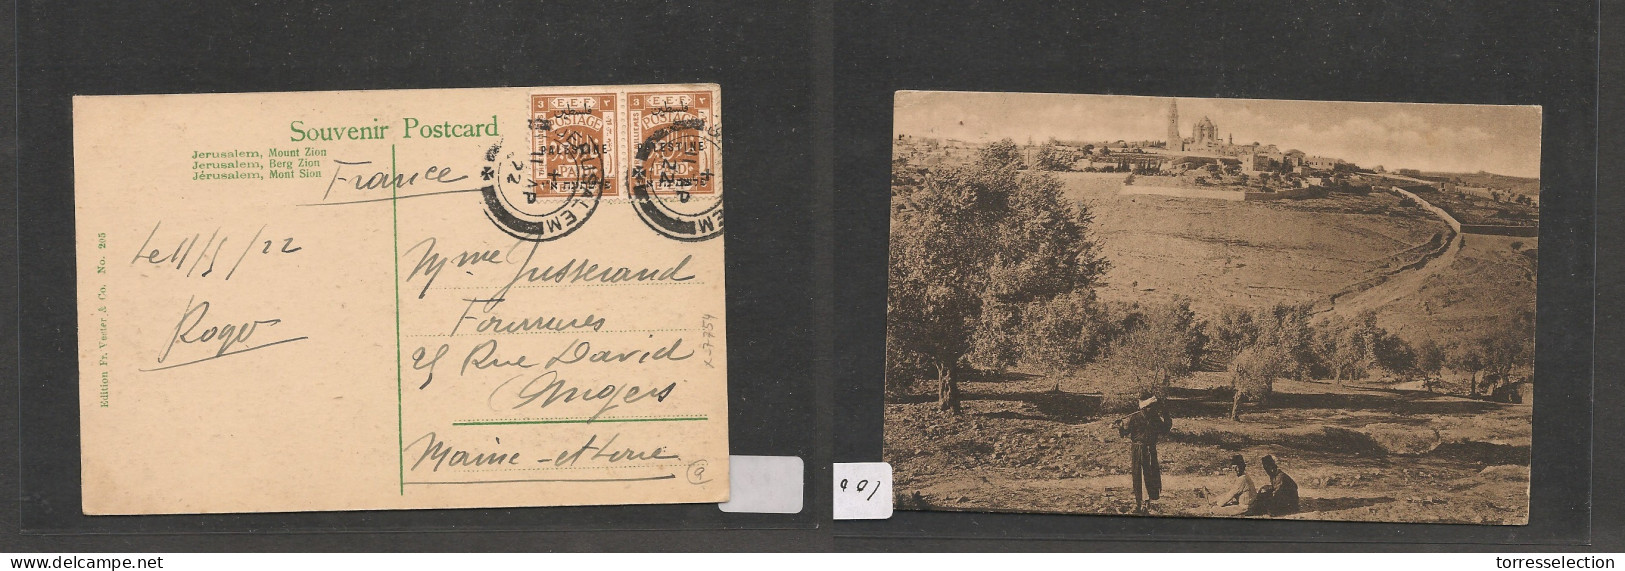 PALESTINE. Palestine Cover - 1922 Jerusalem To Angers France Mult Fkd Pcard Ovpted Issue, Fine XSALE. - Palestine